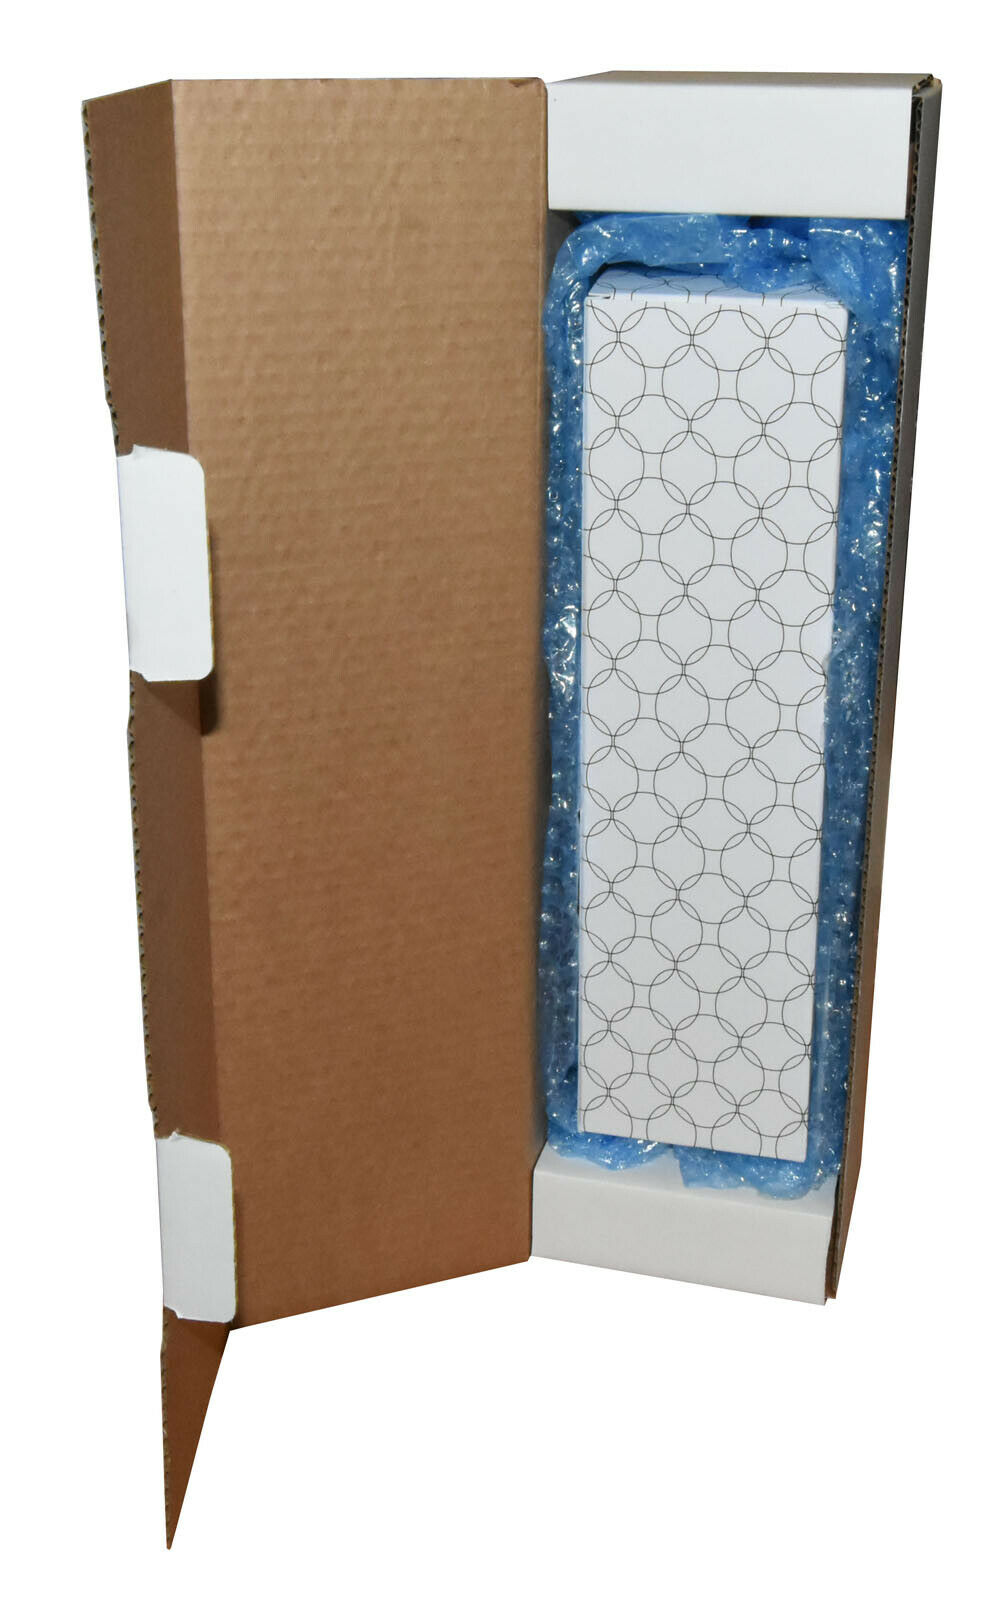 Ovals Gift Wrap Postal Box for Wine Bottles Christmas includes Bubble Wrap